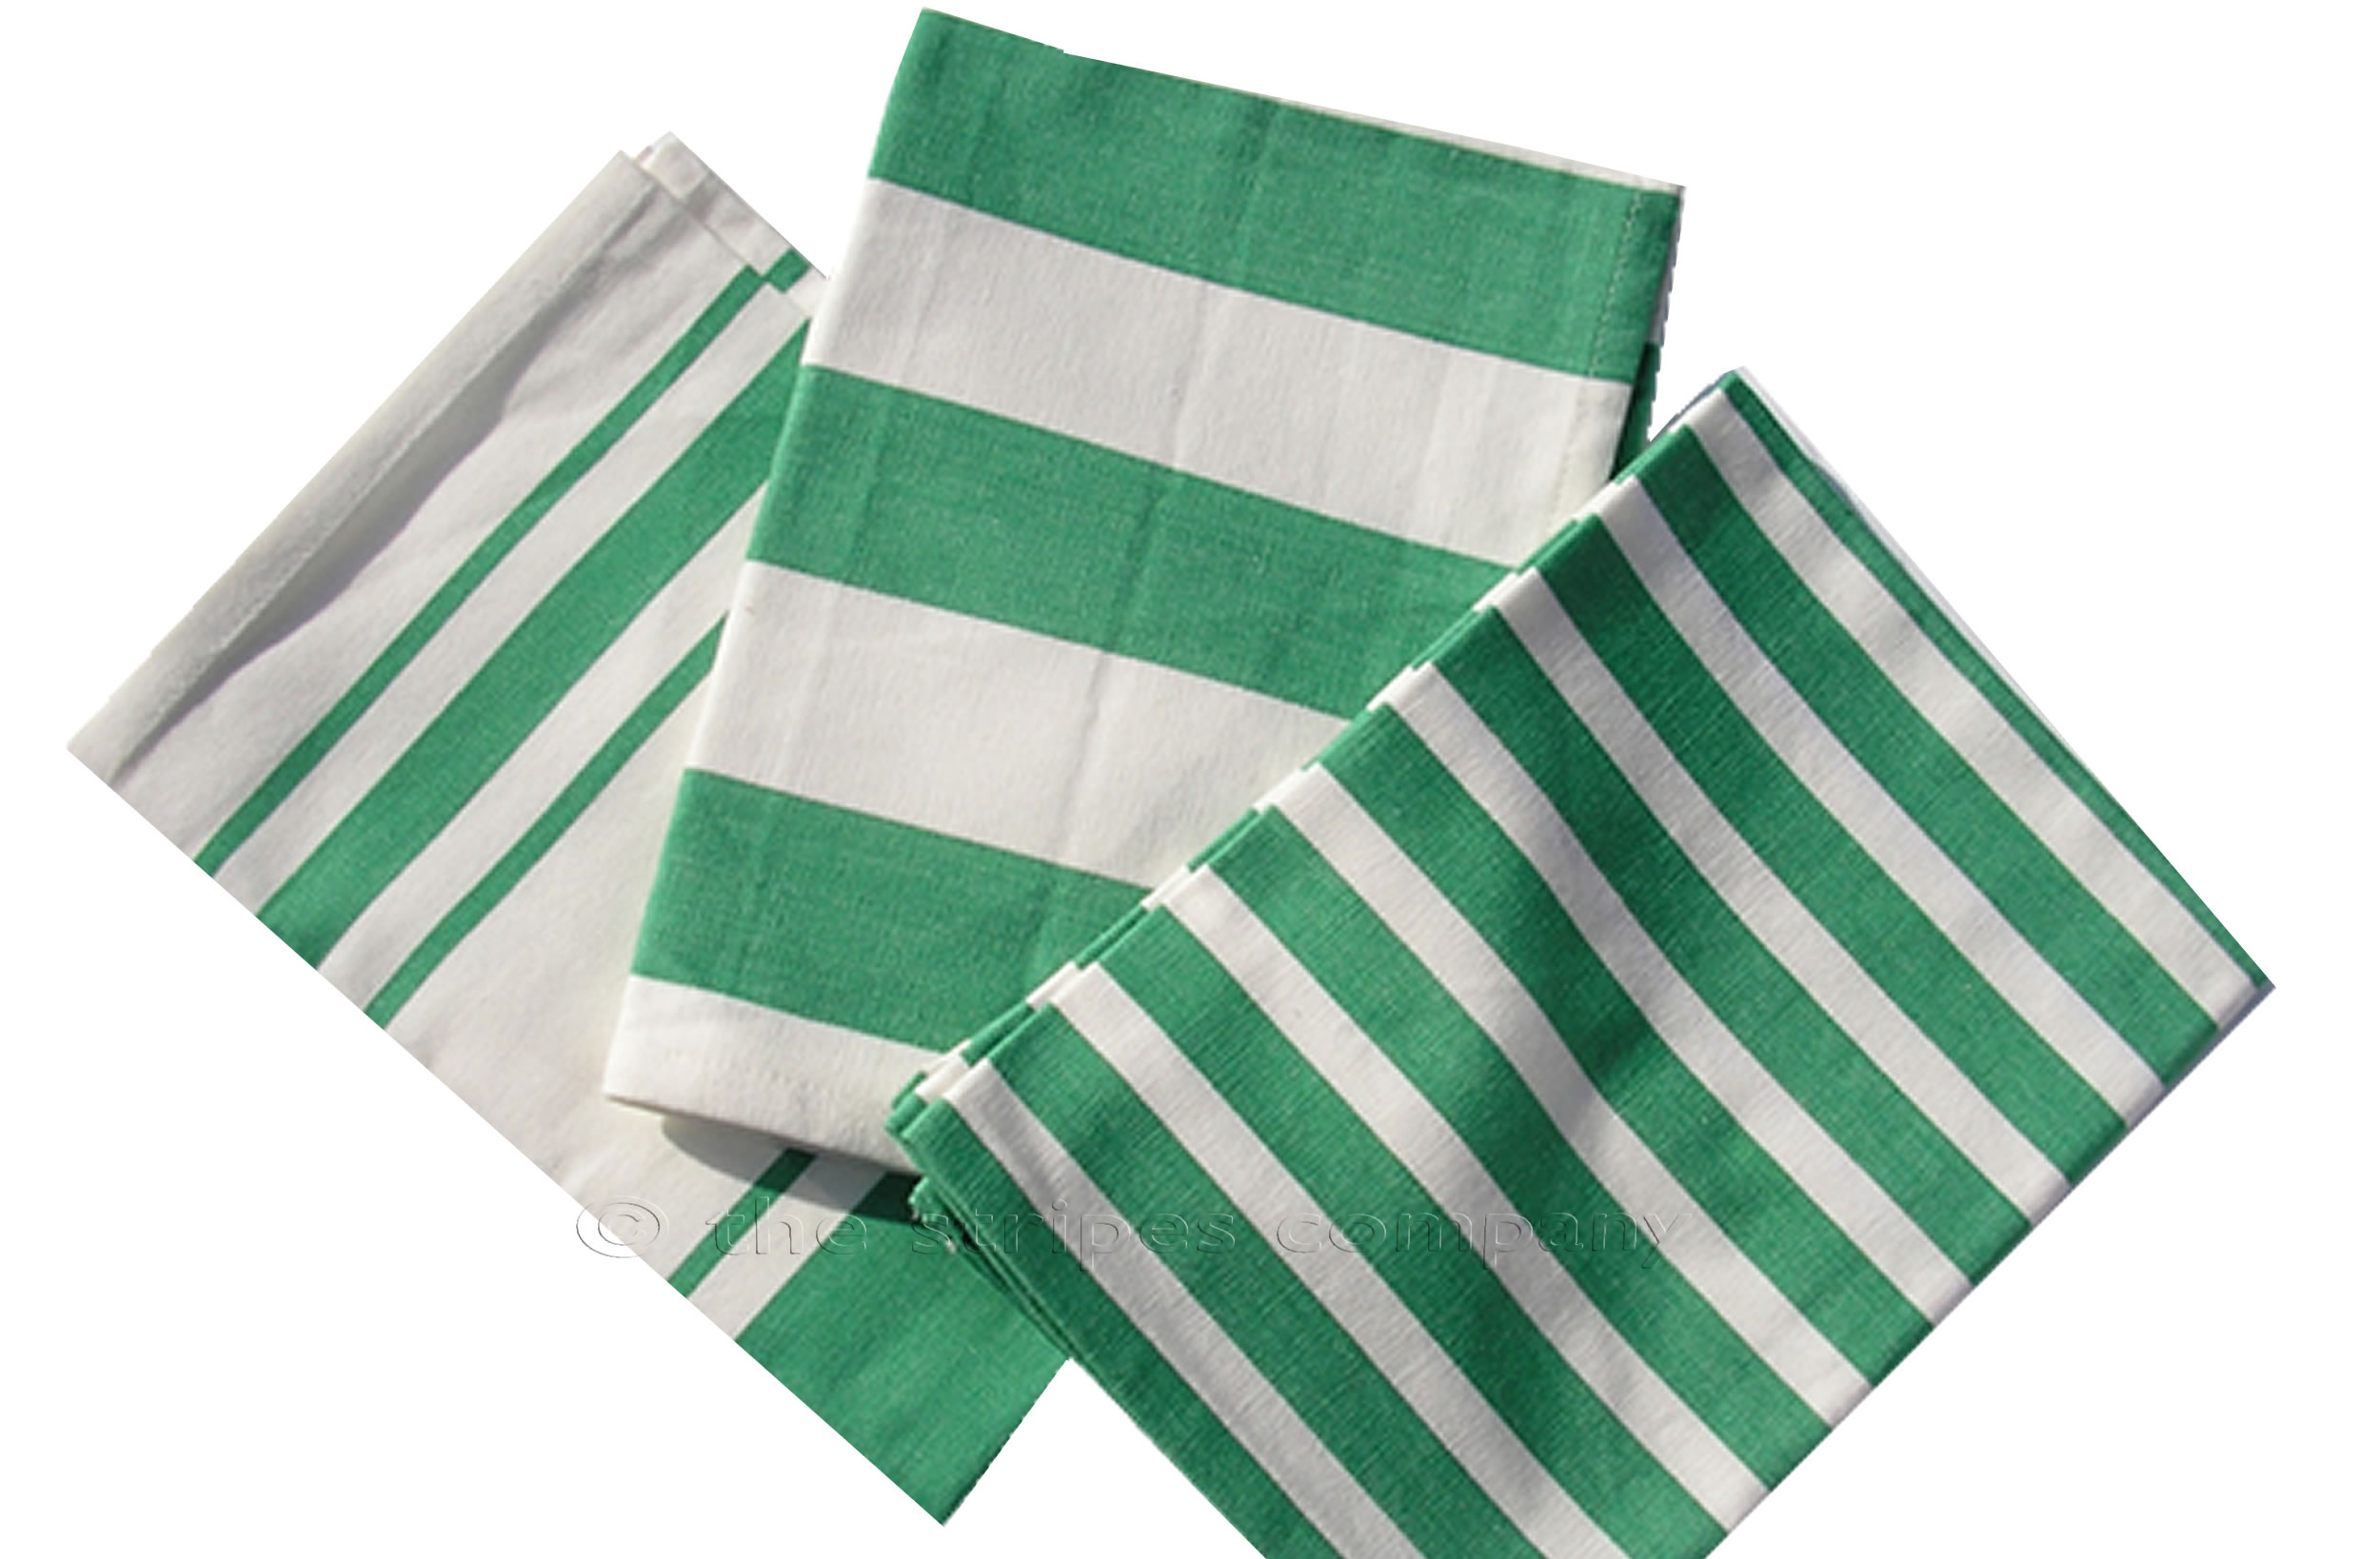 Green and white striped tea towels 